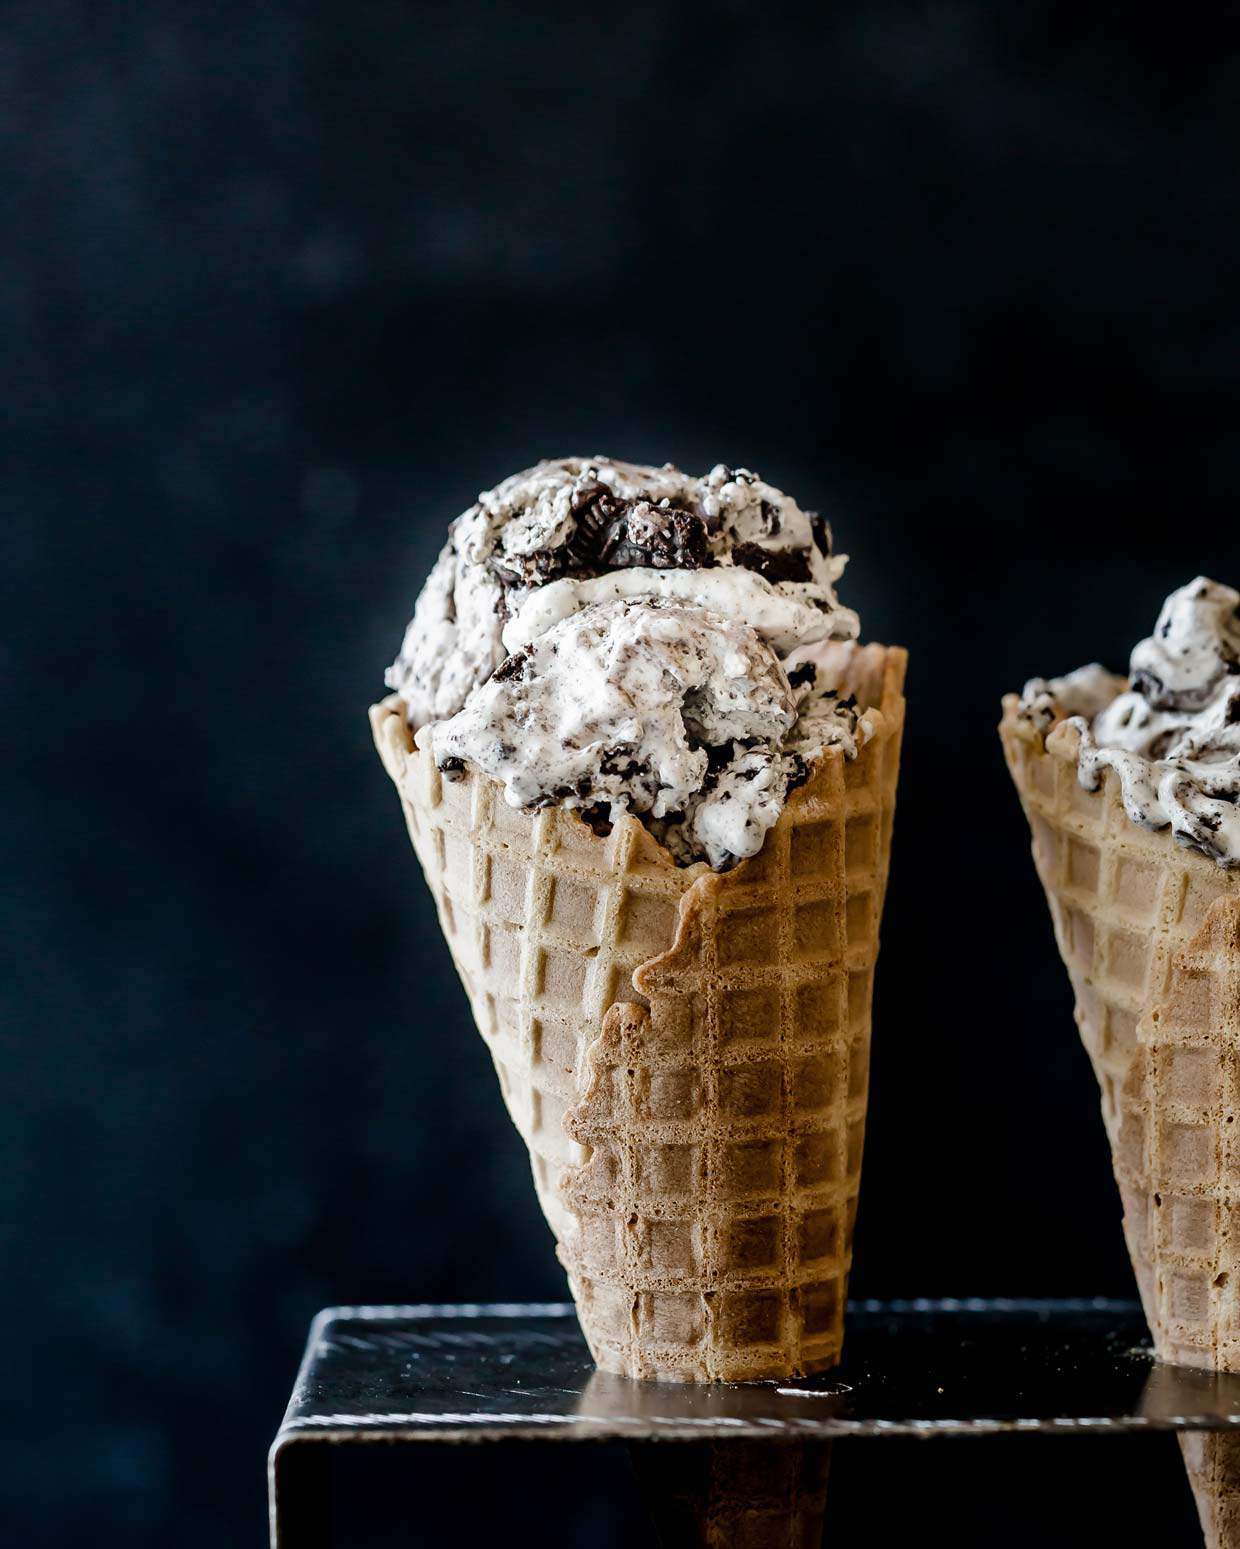 Oreo Ice Cream in a waffle cone against a black background.